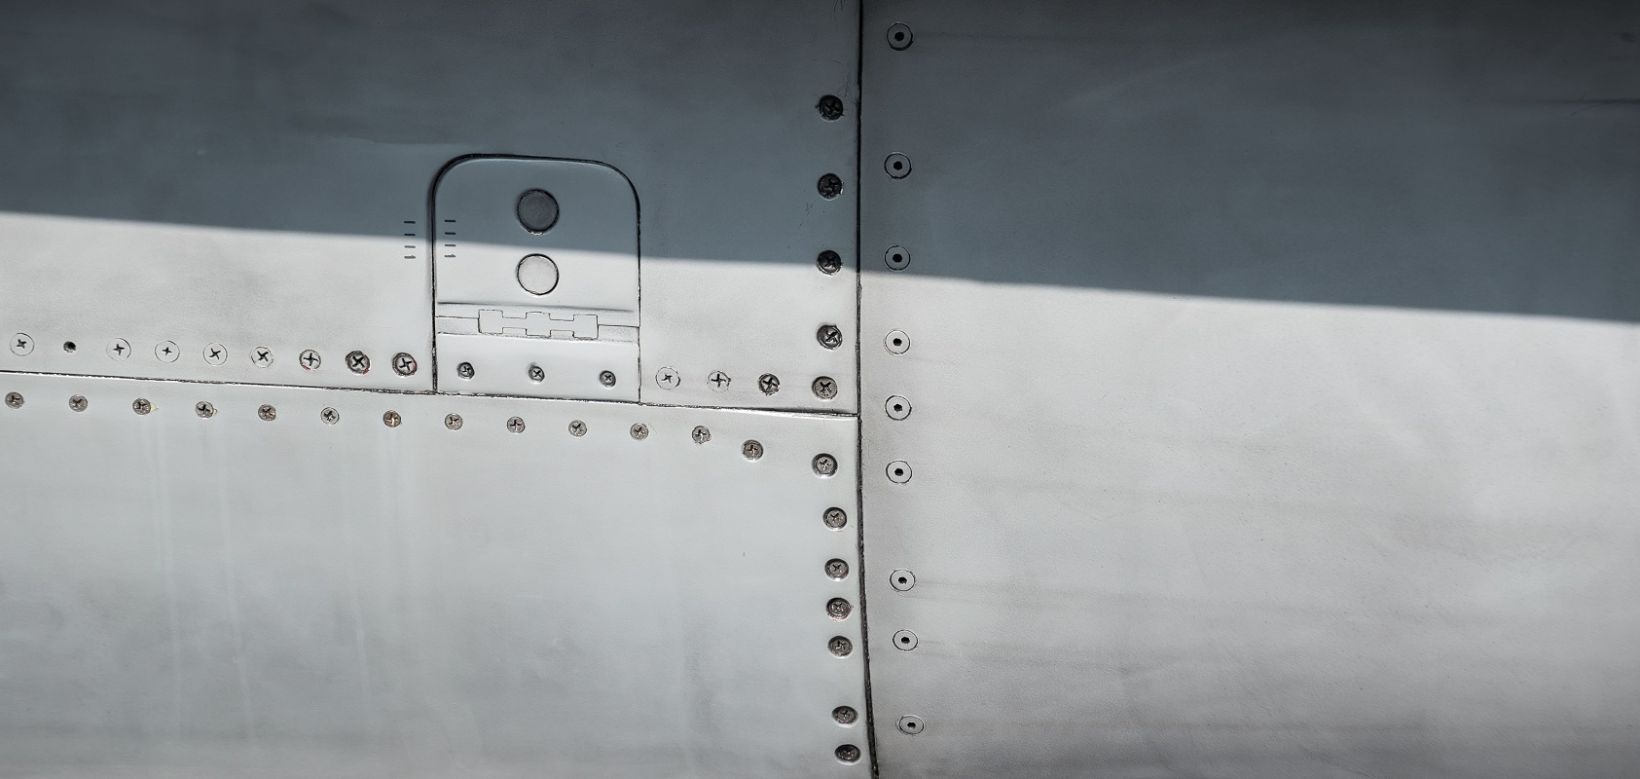 Figure 1. Inpection of fastener holes on an aircraft using a MiniMite™ rotating bolthole scanner and NORTEC™ series eddy current flaw detector.